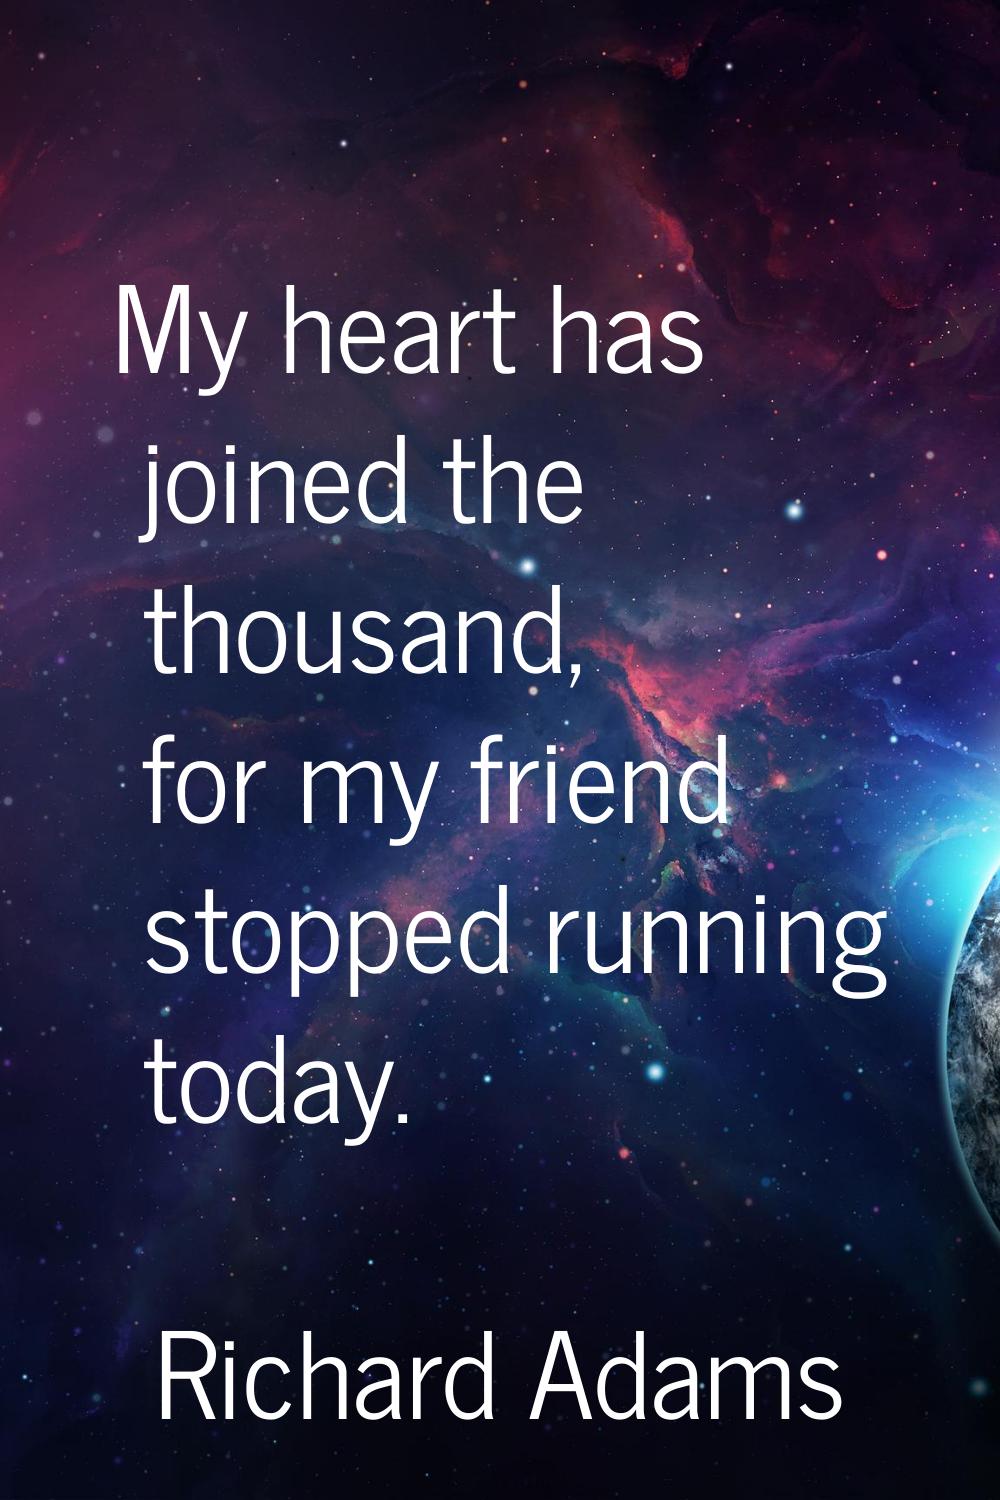 My heart has joined the thousand, for my friend stopped running today.